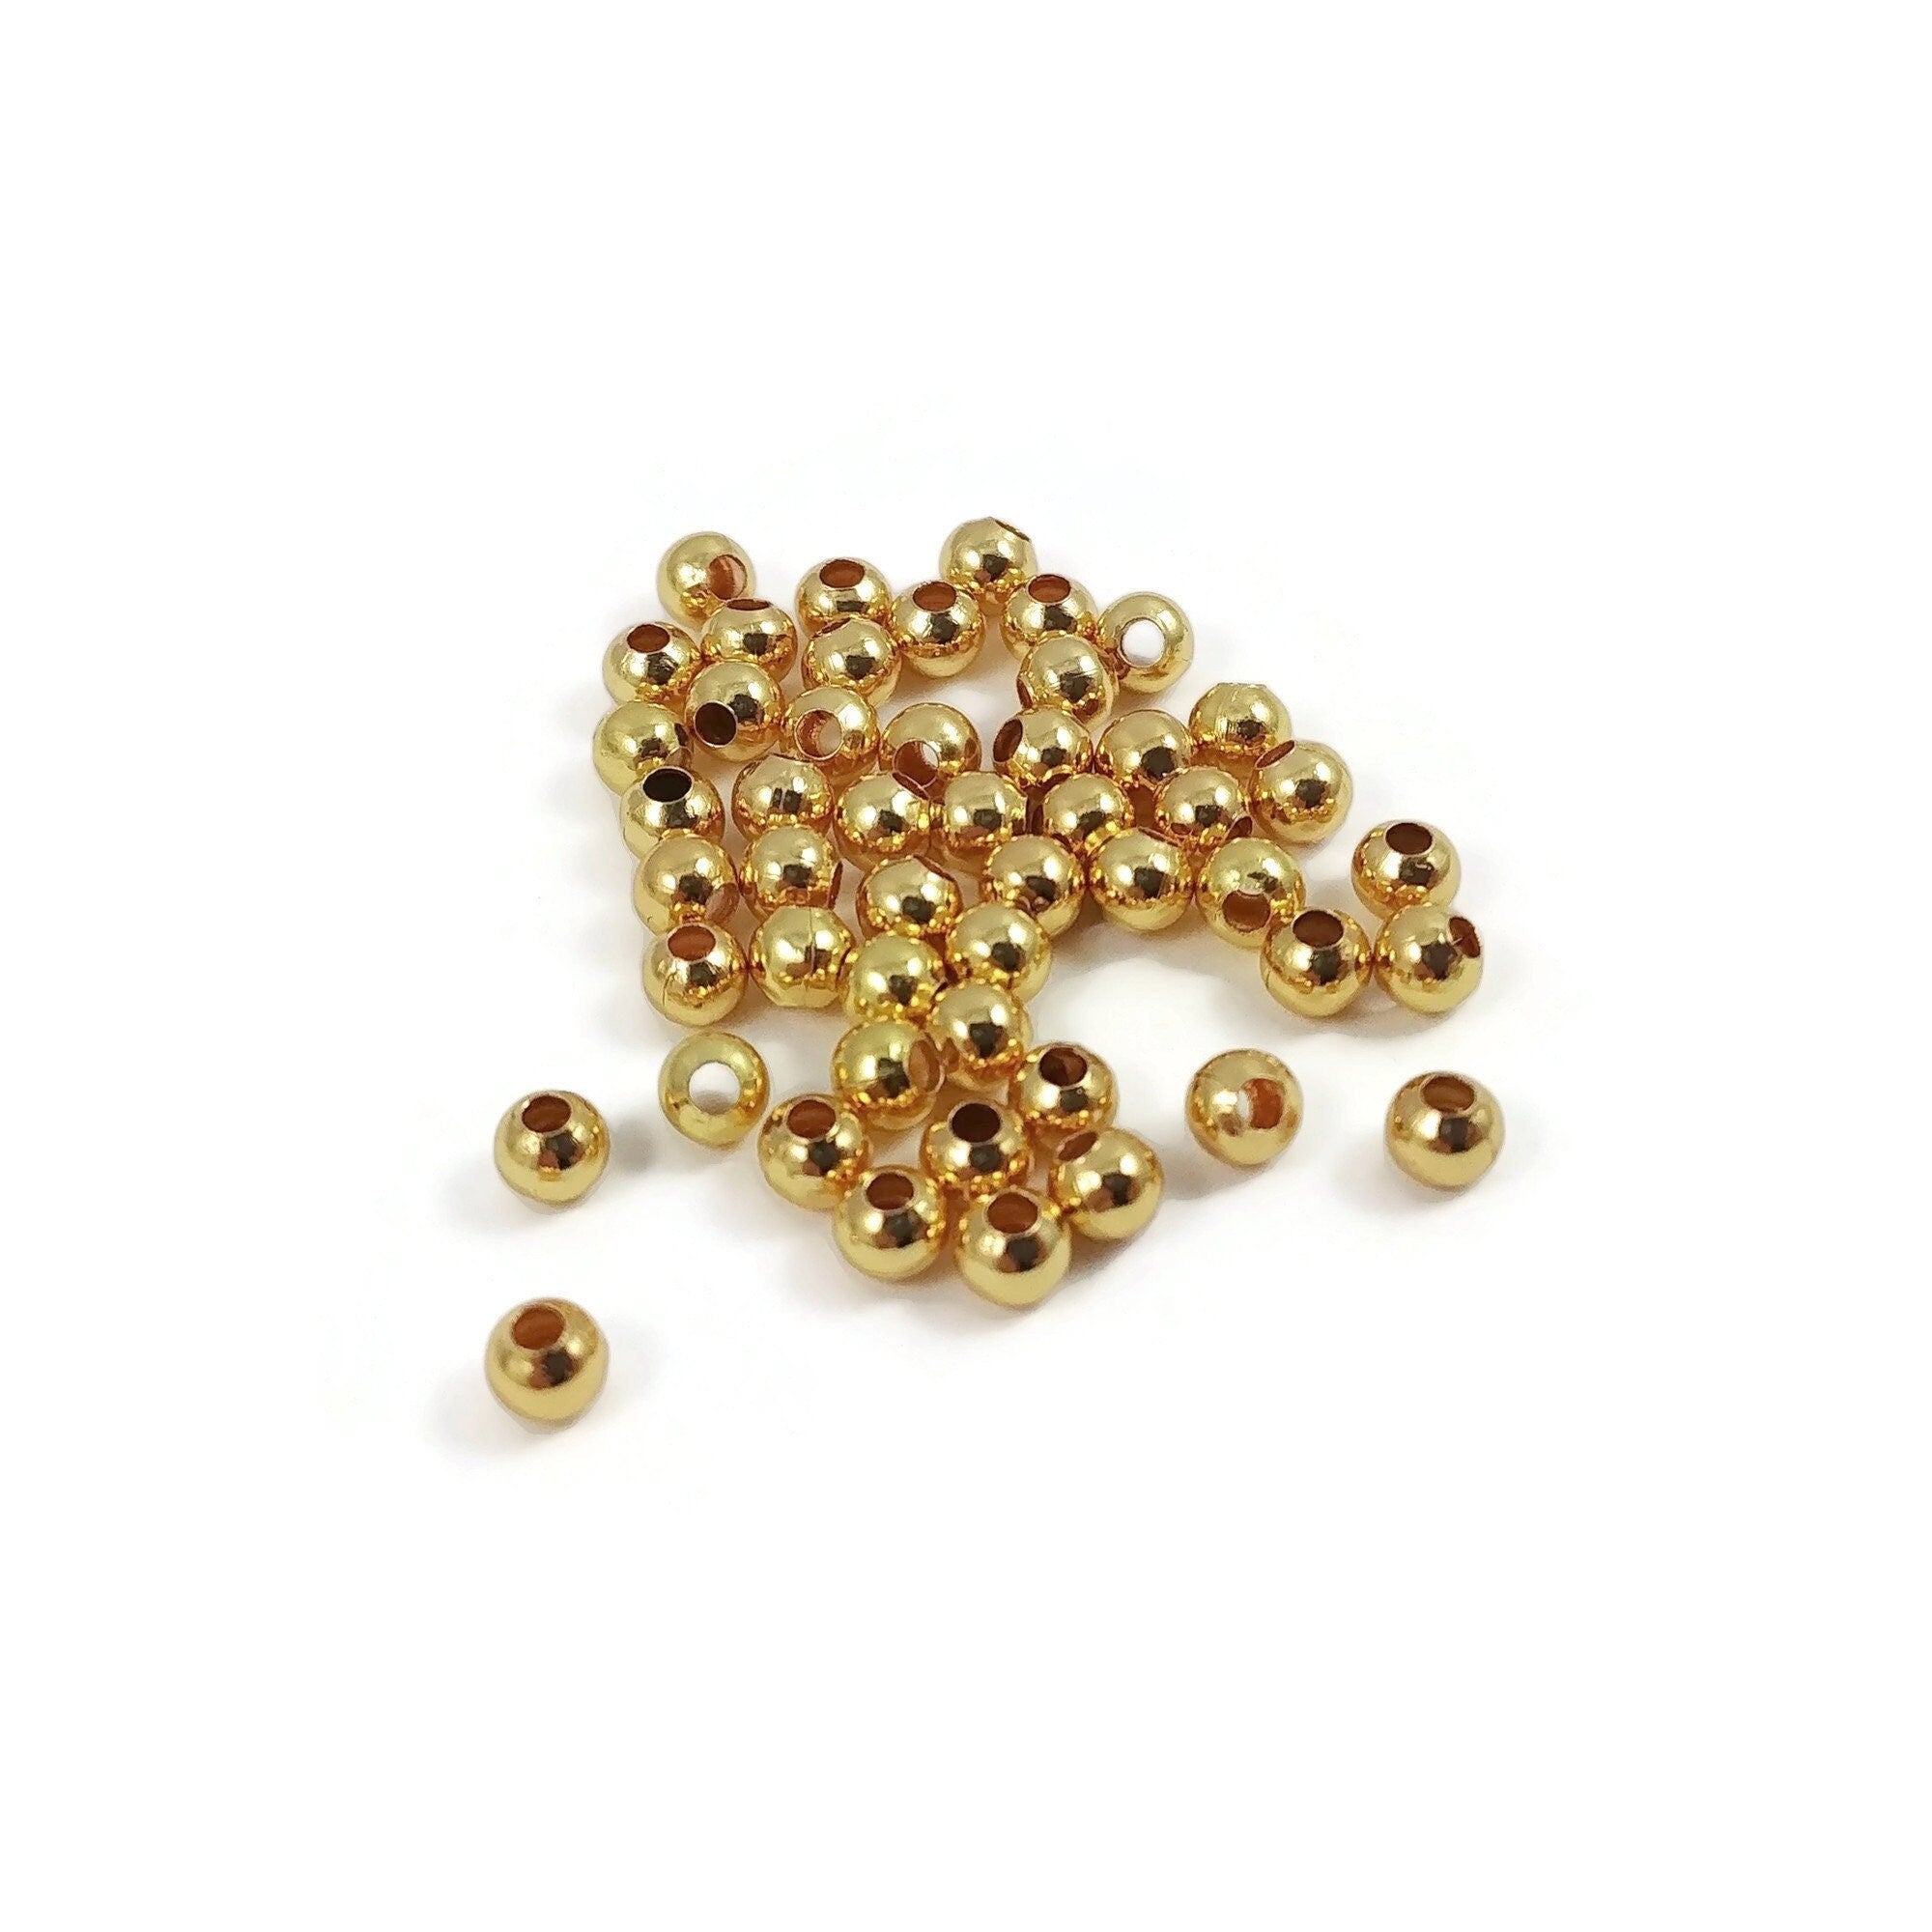 18K gold plated beads, Tiny spacer metal beads for Jewelry making